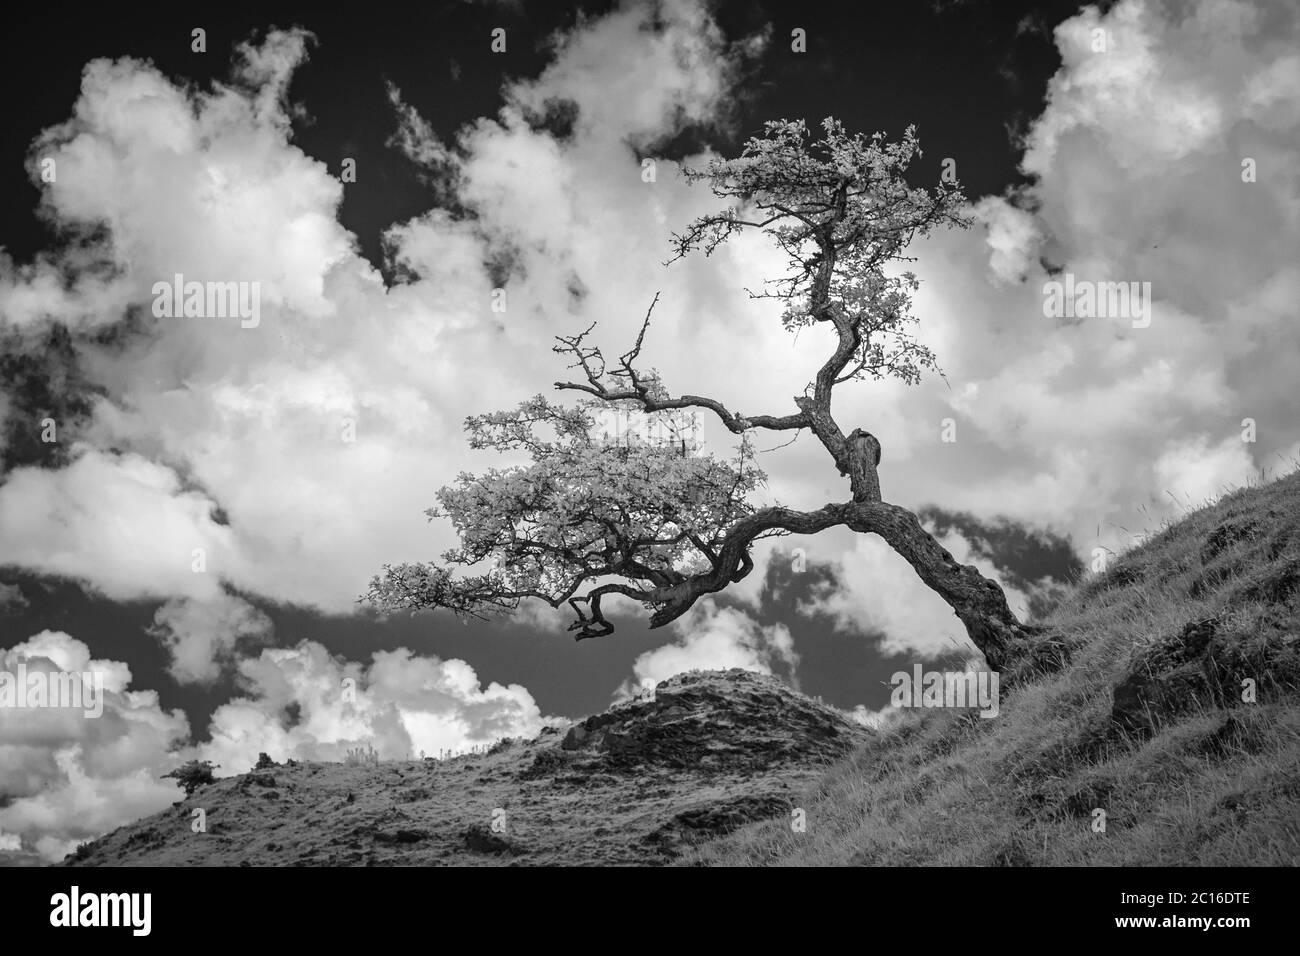 Infra red image of a thorn tree Stock Photo